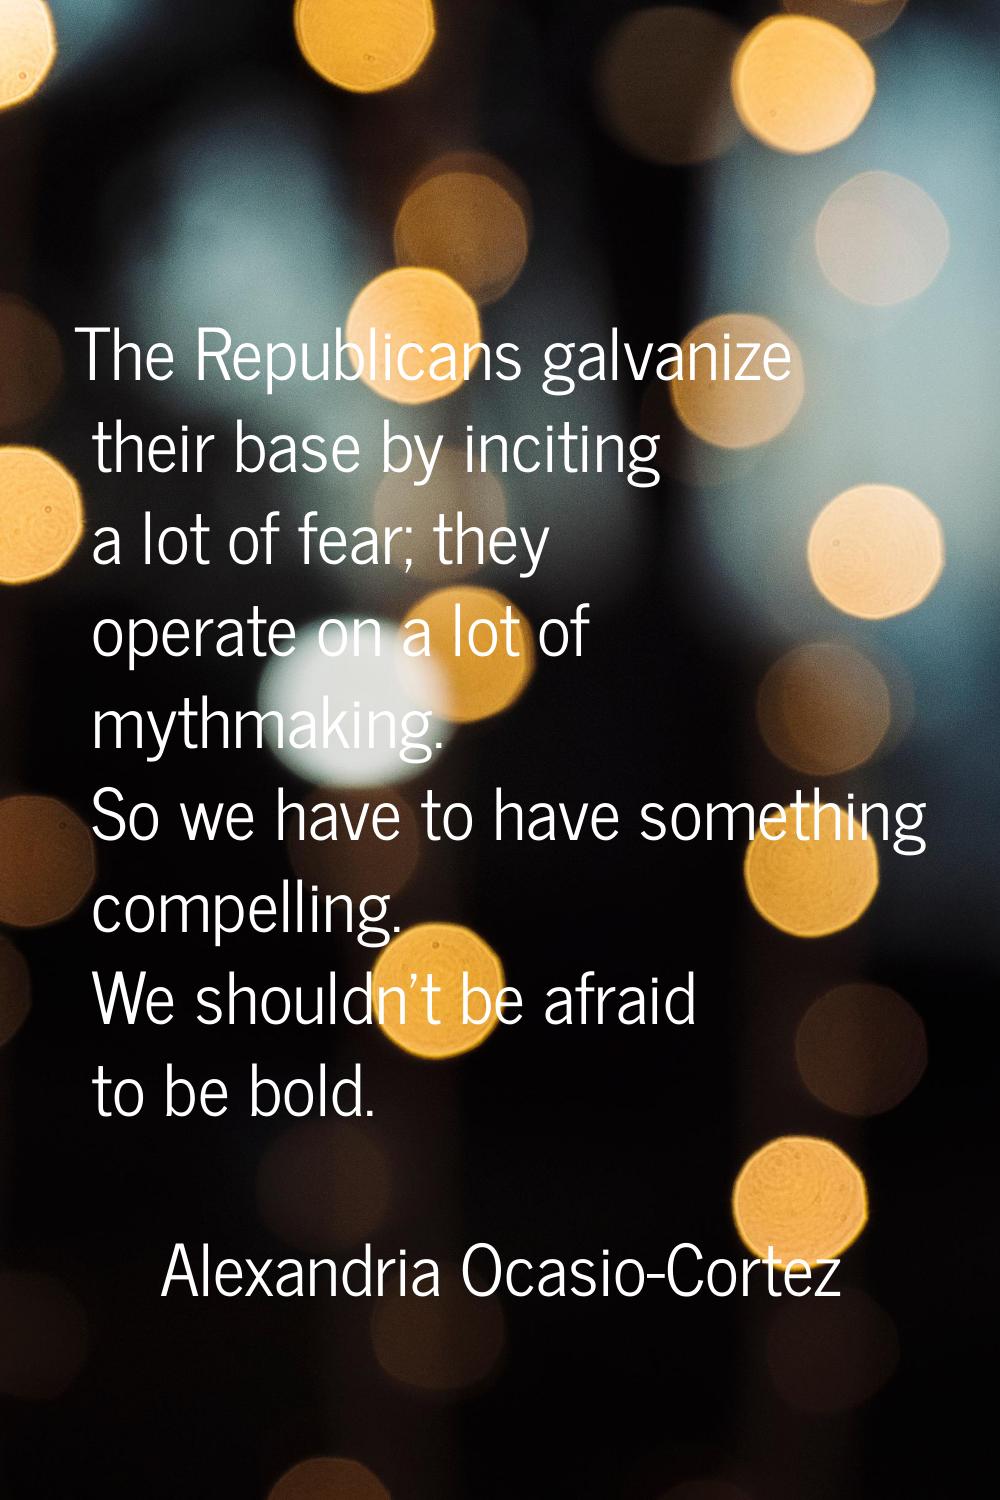 The Republicans galvanize their base by inciting a lot of fear; they operate on a lot of mythmaking